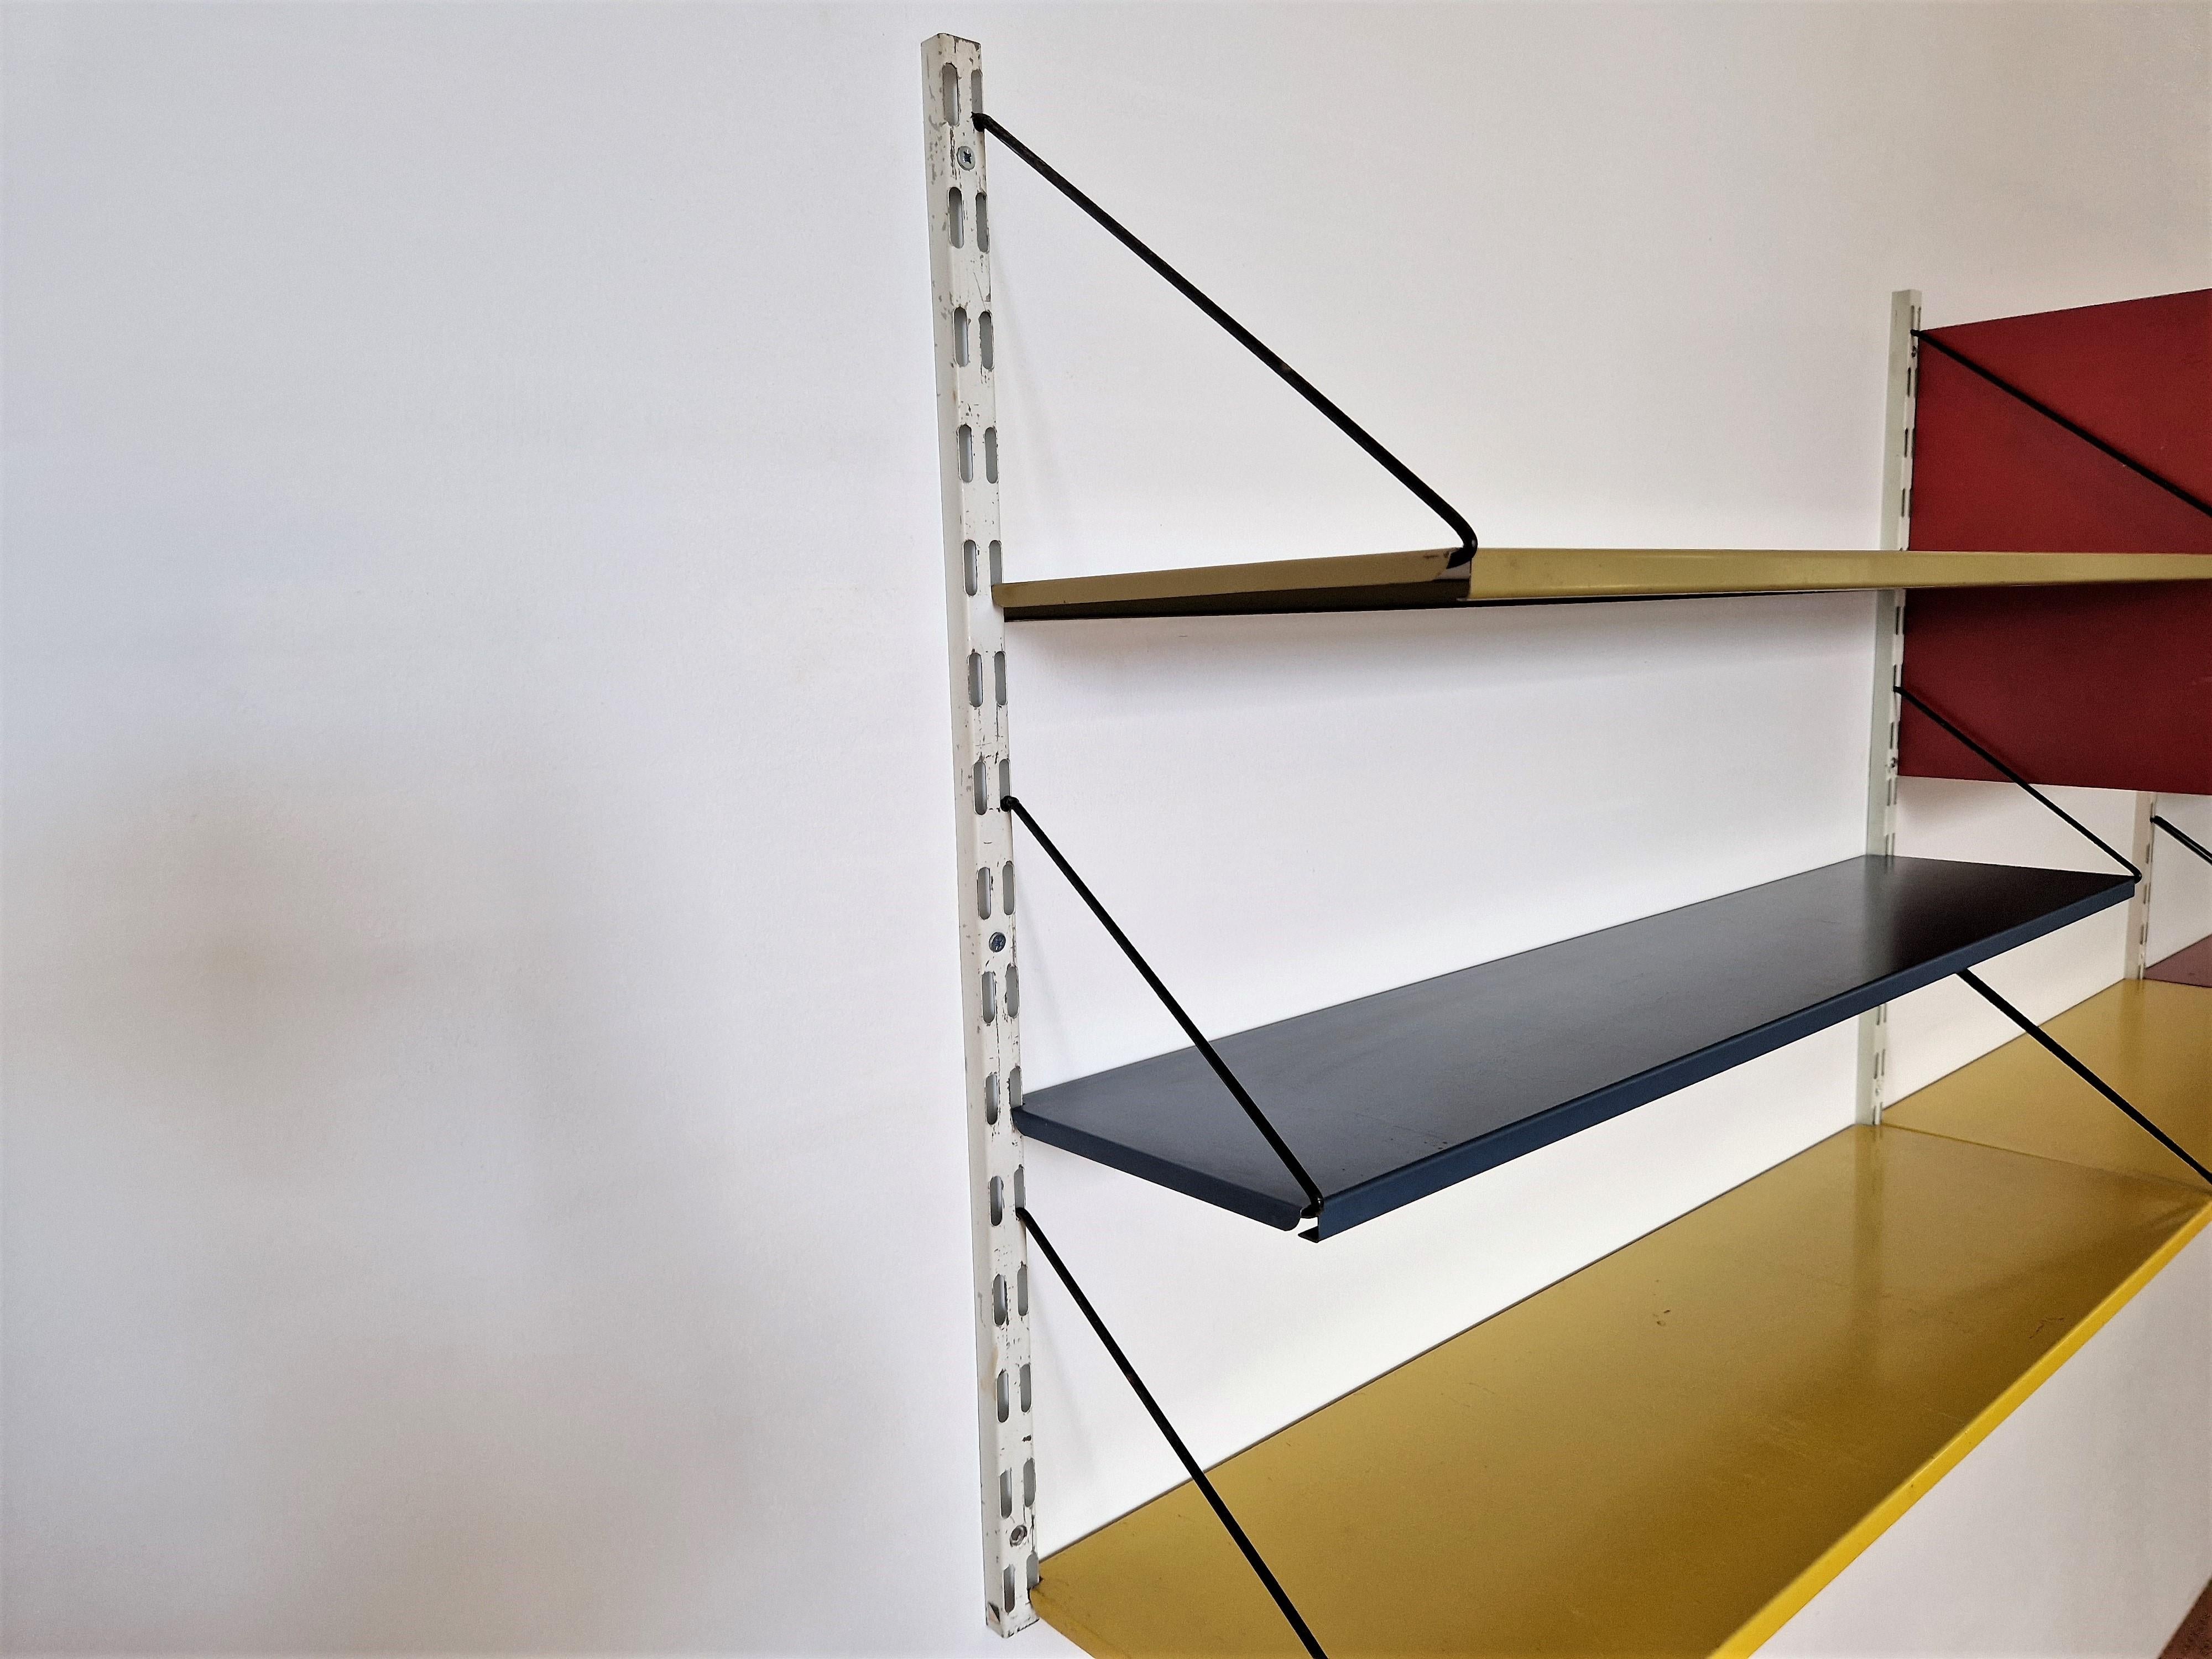 Lacquered Metal Wall Unit in Red, Yellow and Blue by Tjerk Rijenga for Pilastro, 1950's For Sale